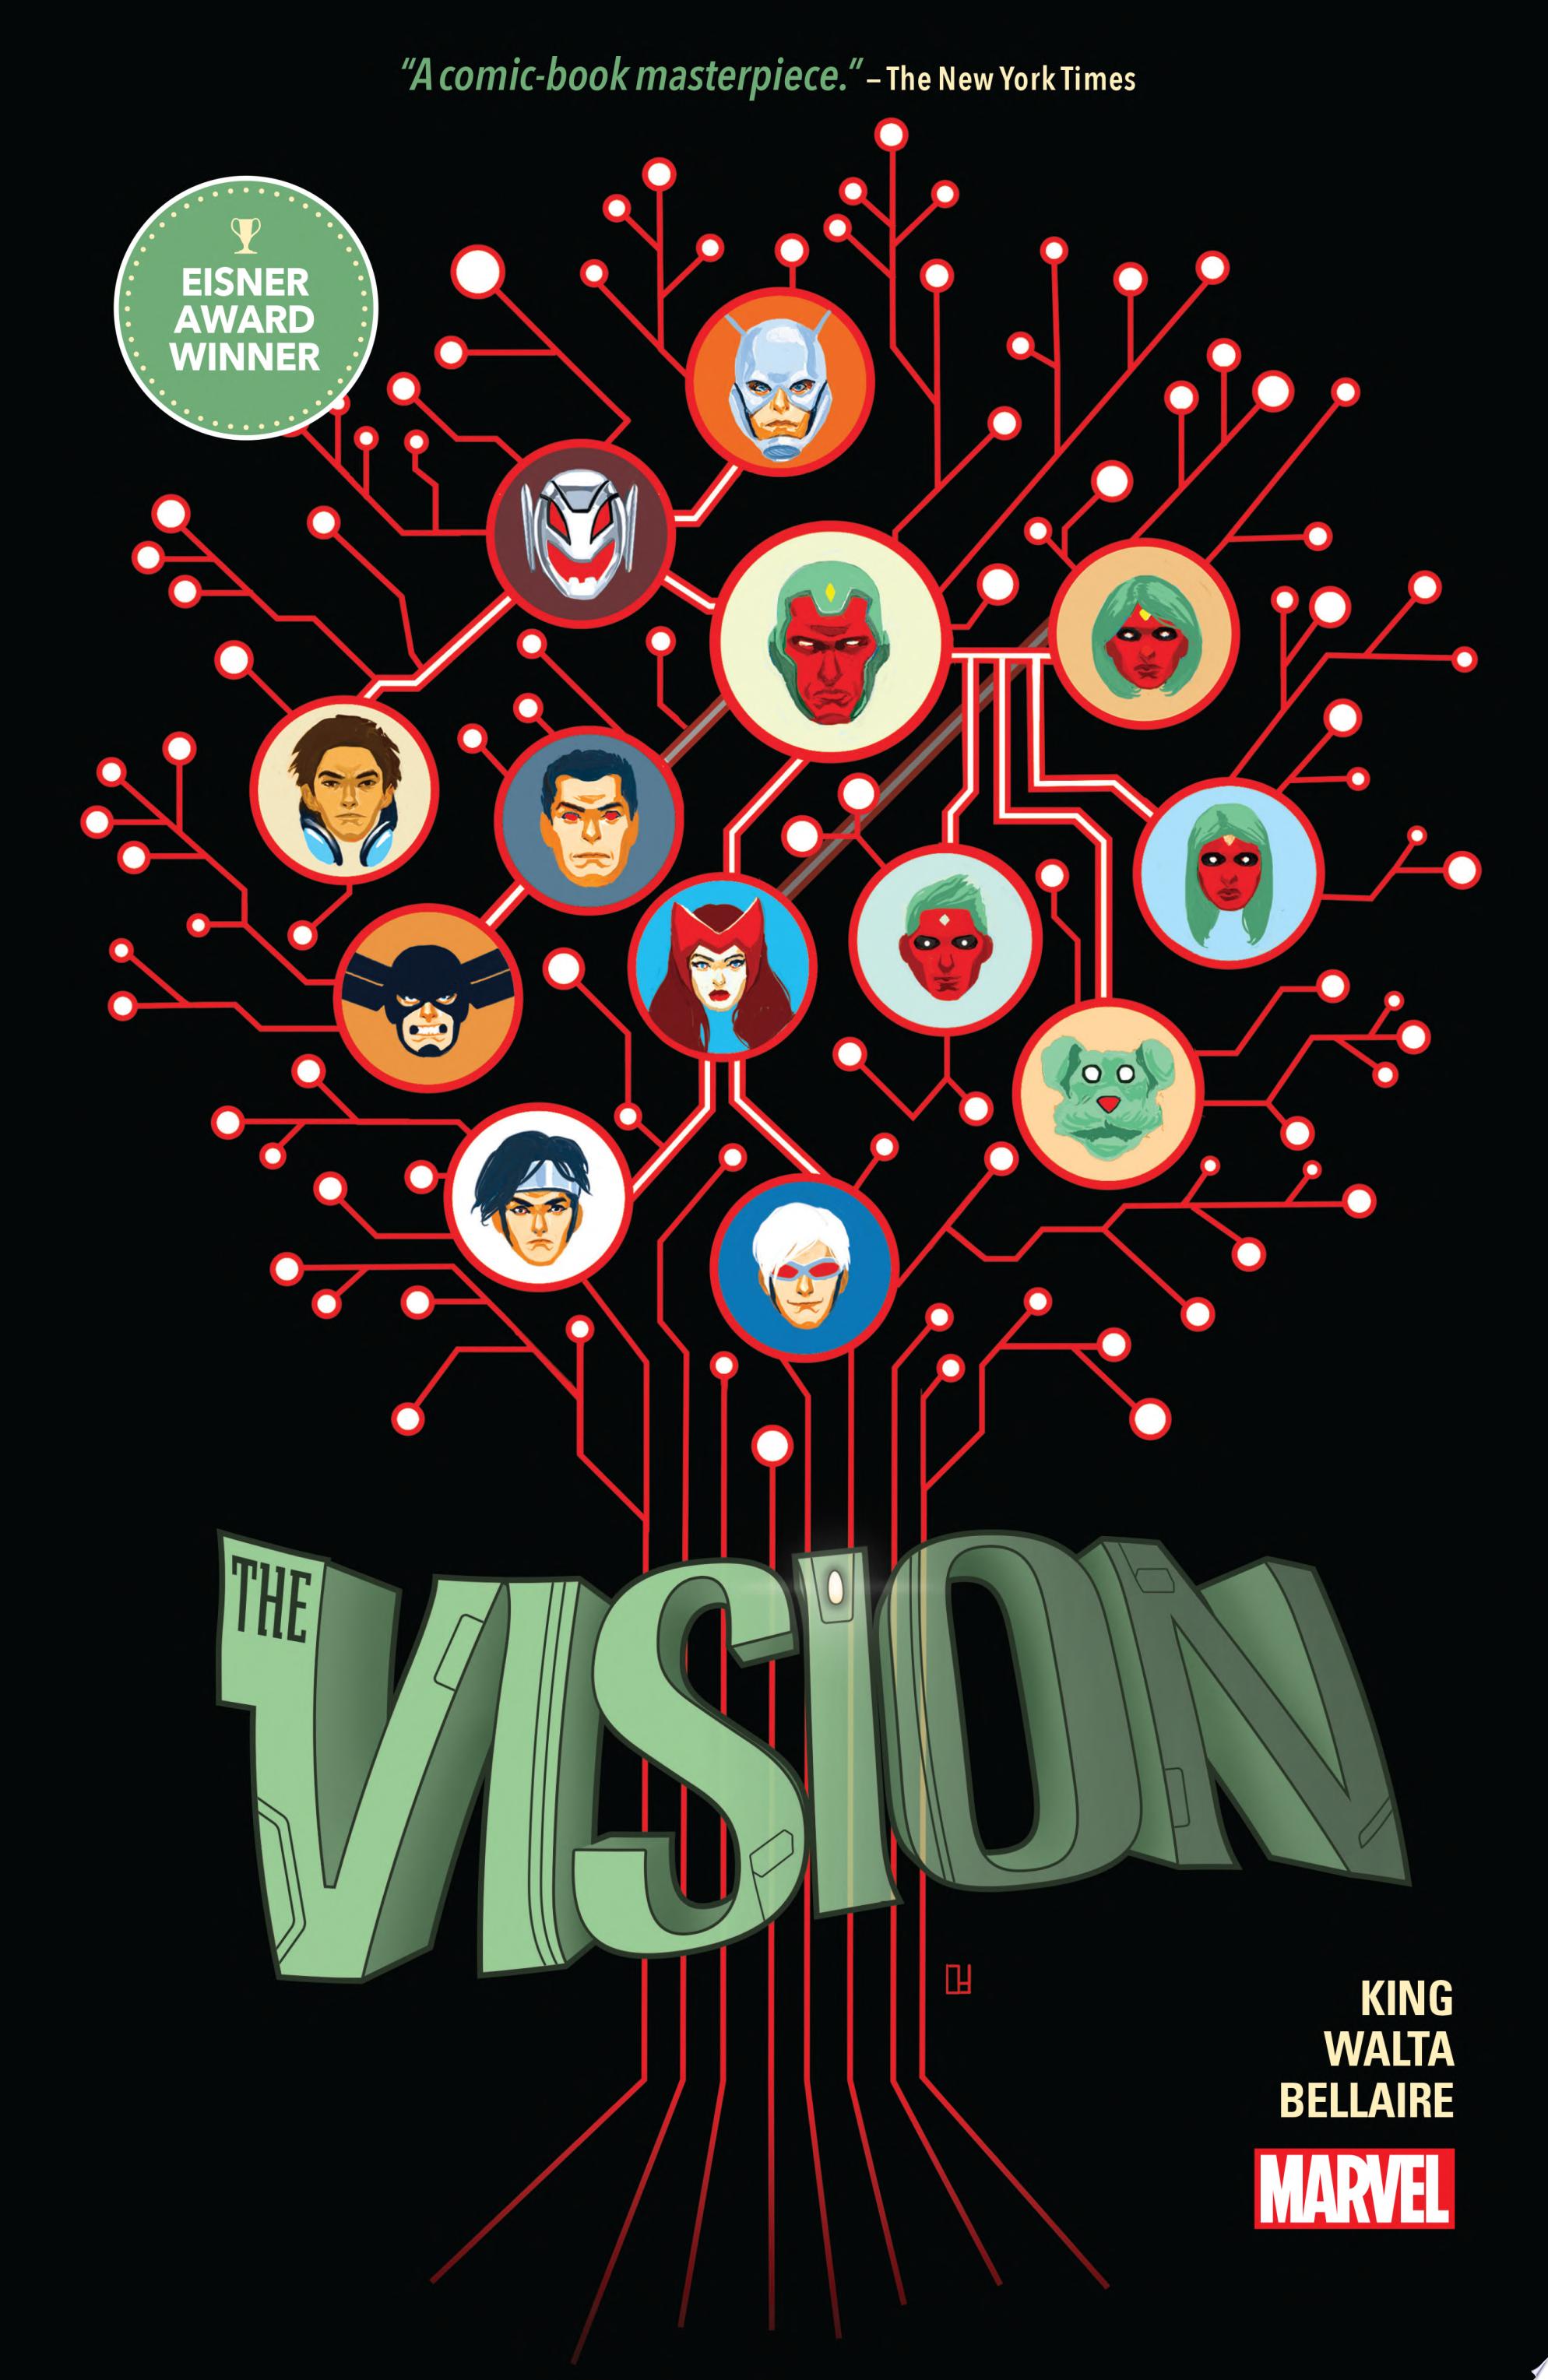 Image for "Vision"